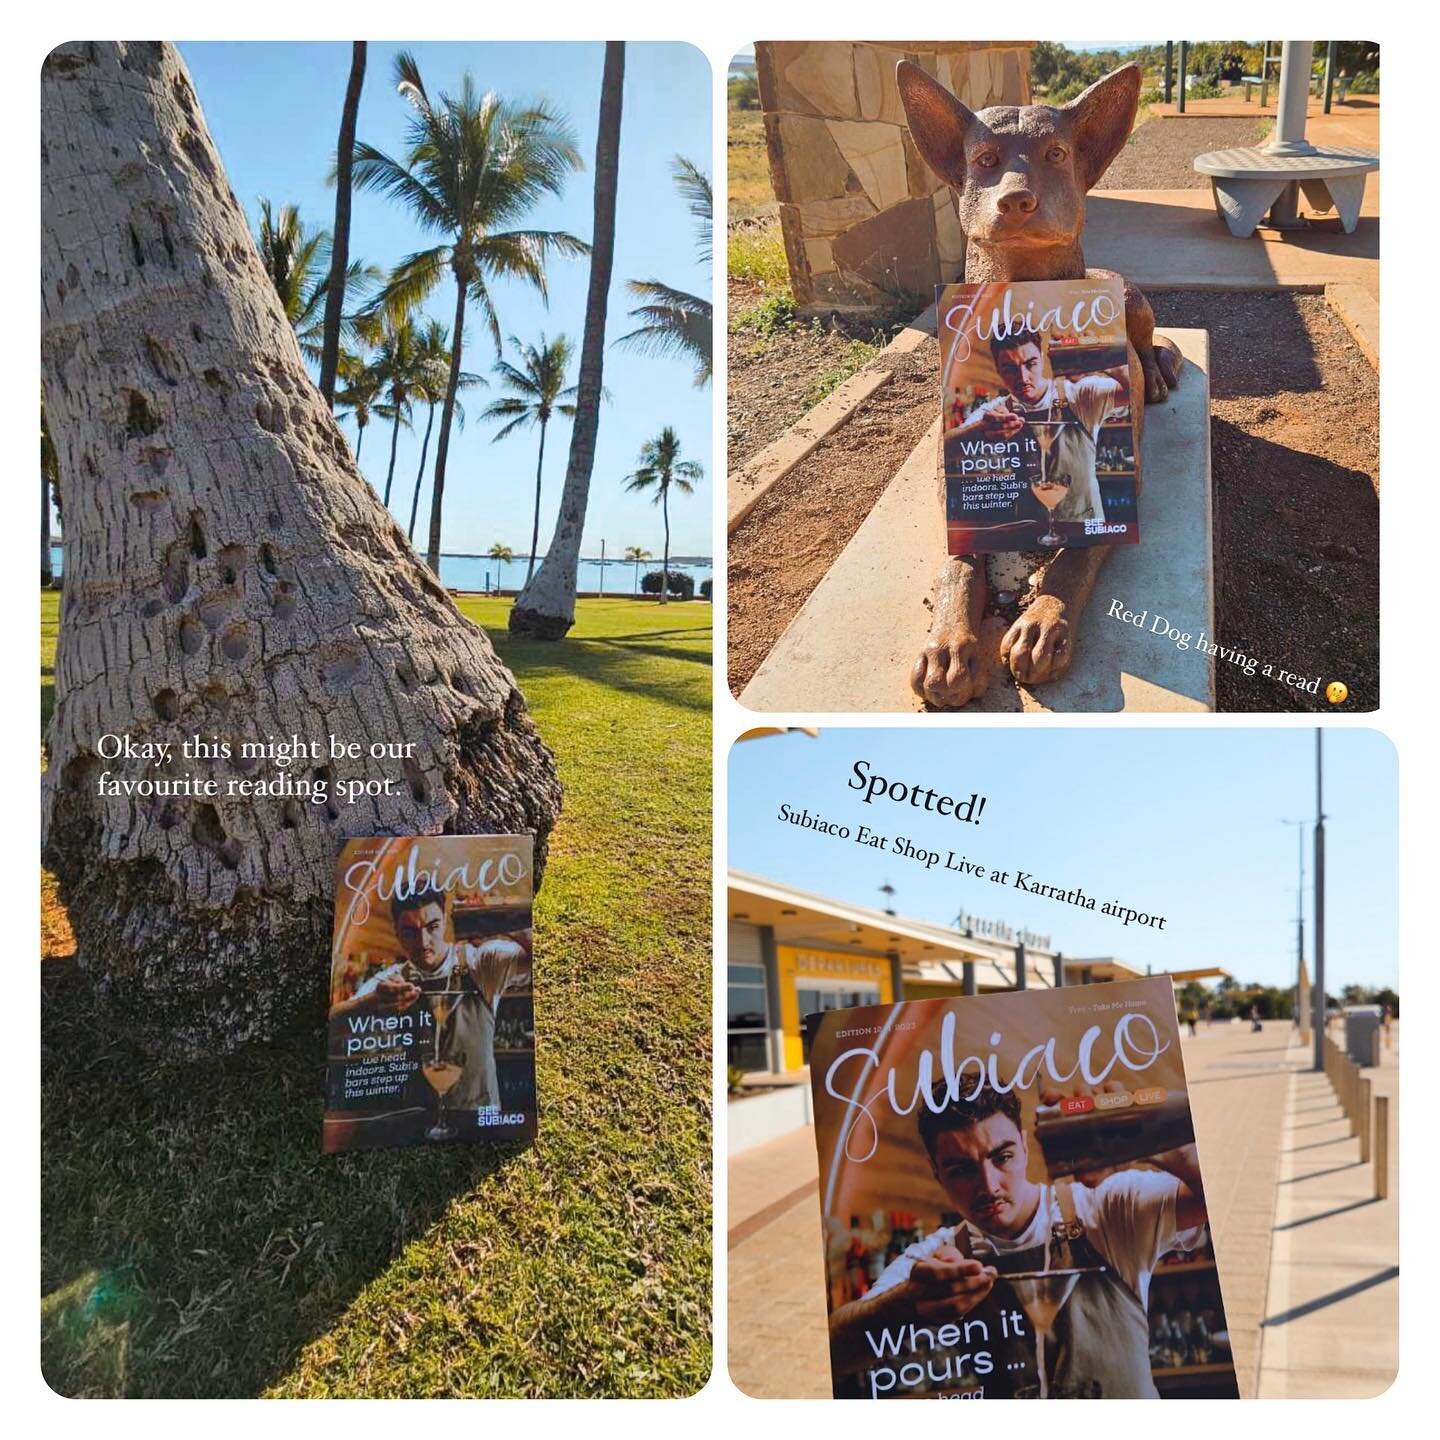 SPOTTED in Karratha - what a well-travelled magazine ✈️

If you&rsquo;d like to reach readers all over WA in the bumper summer/Christmas issue of Subiaco: Eat Shop Live, drop us a DM or email shelley@galleypress.com.au

Spots are filling up FAST 💨 
